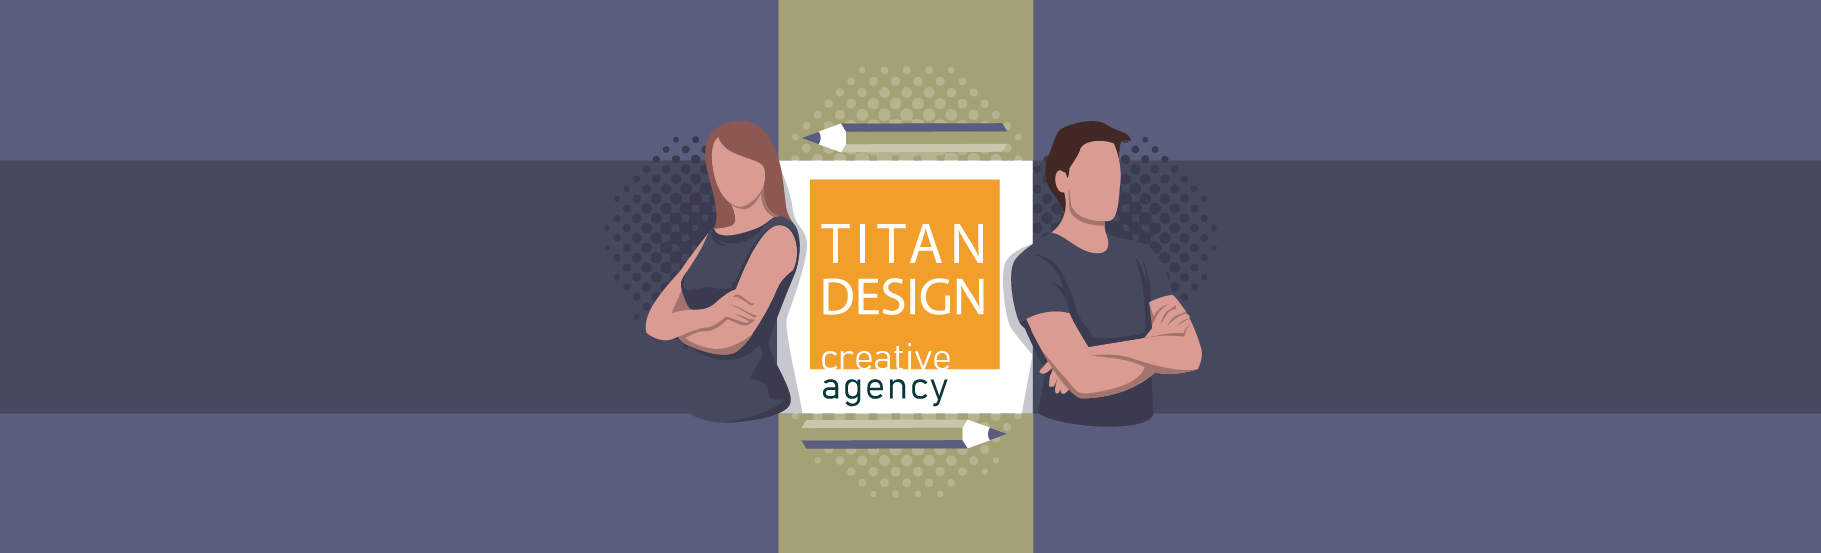 Titan is always there for you and your brand